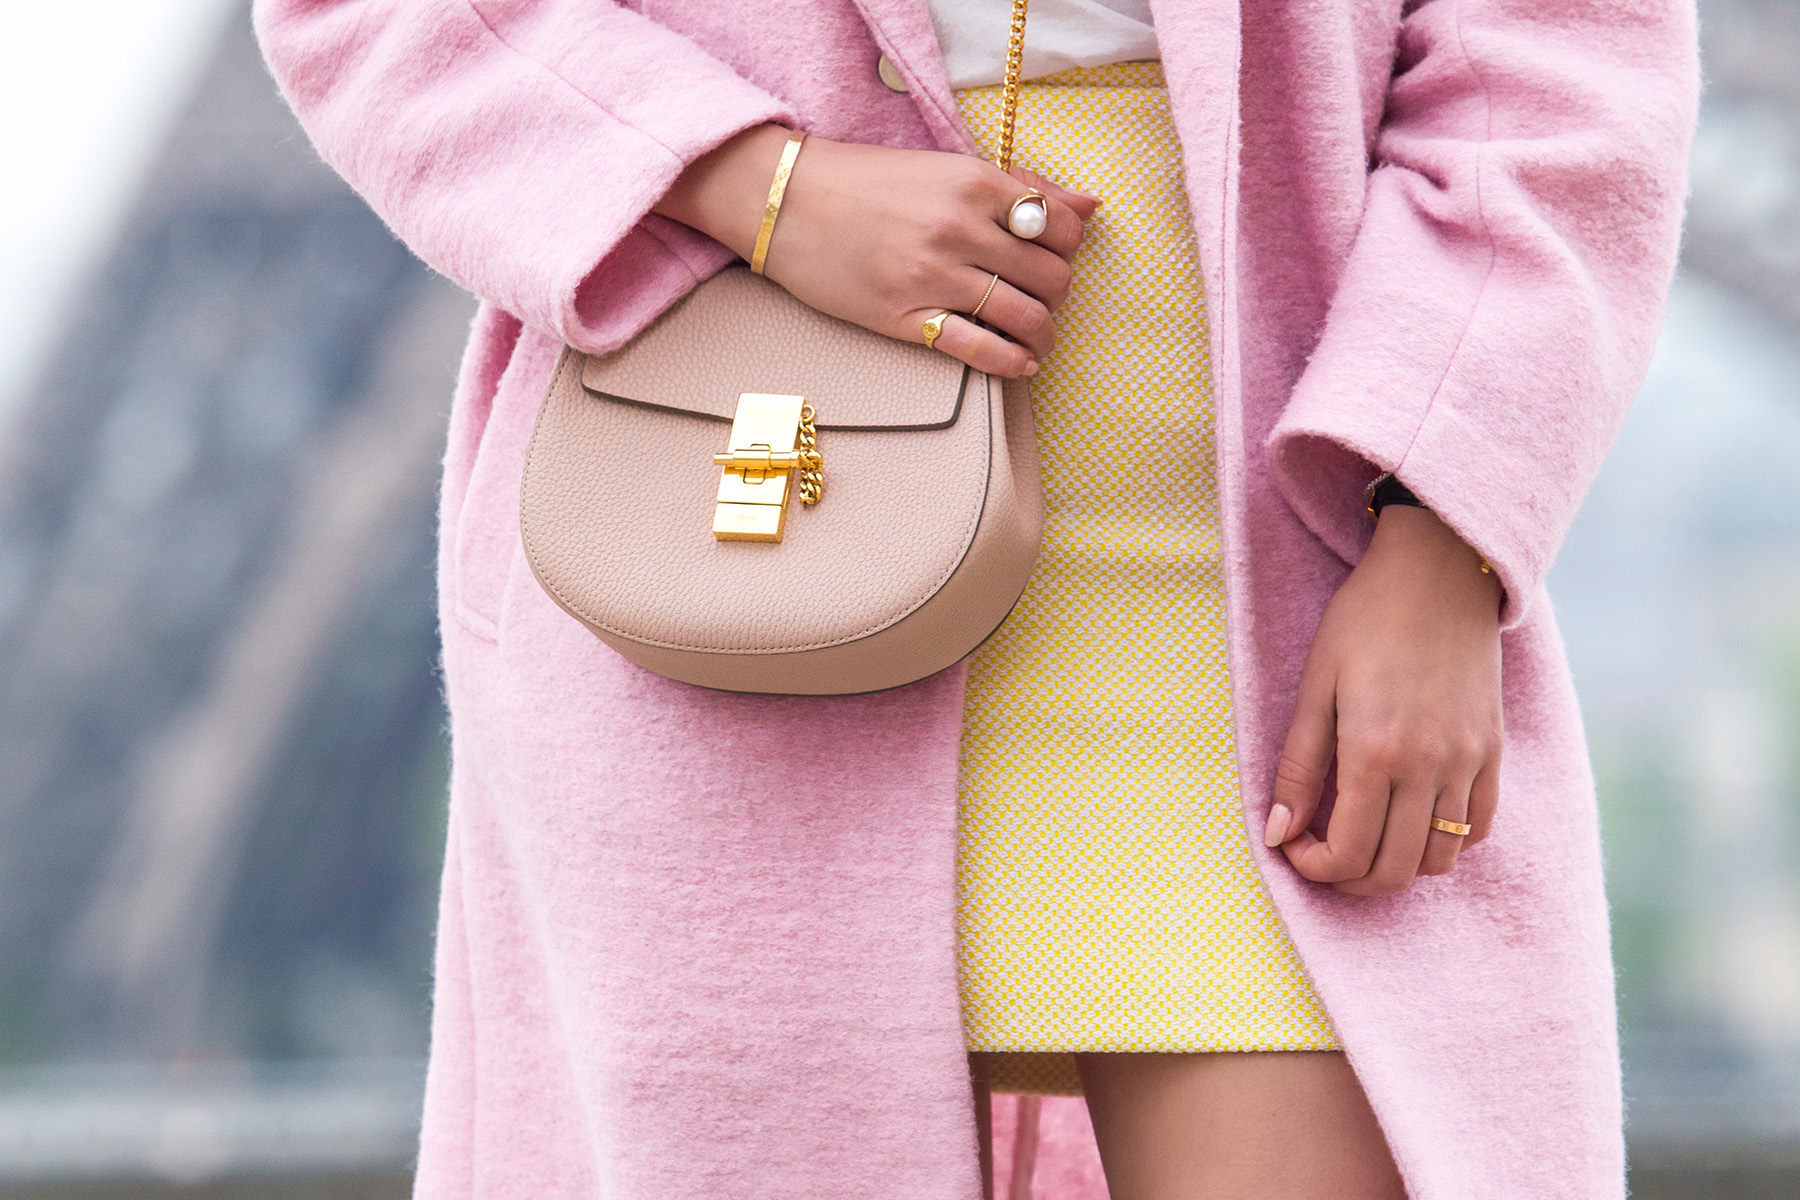 Put Together an All-Pink Outfit and We’ll Give You a New Hairstyle Pink Outfit Handbag